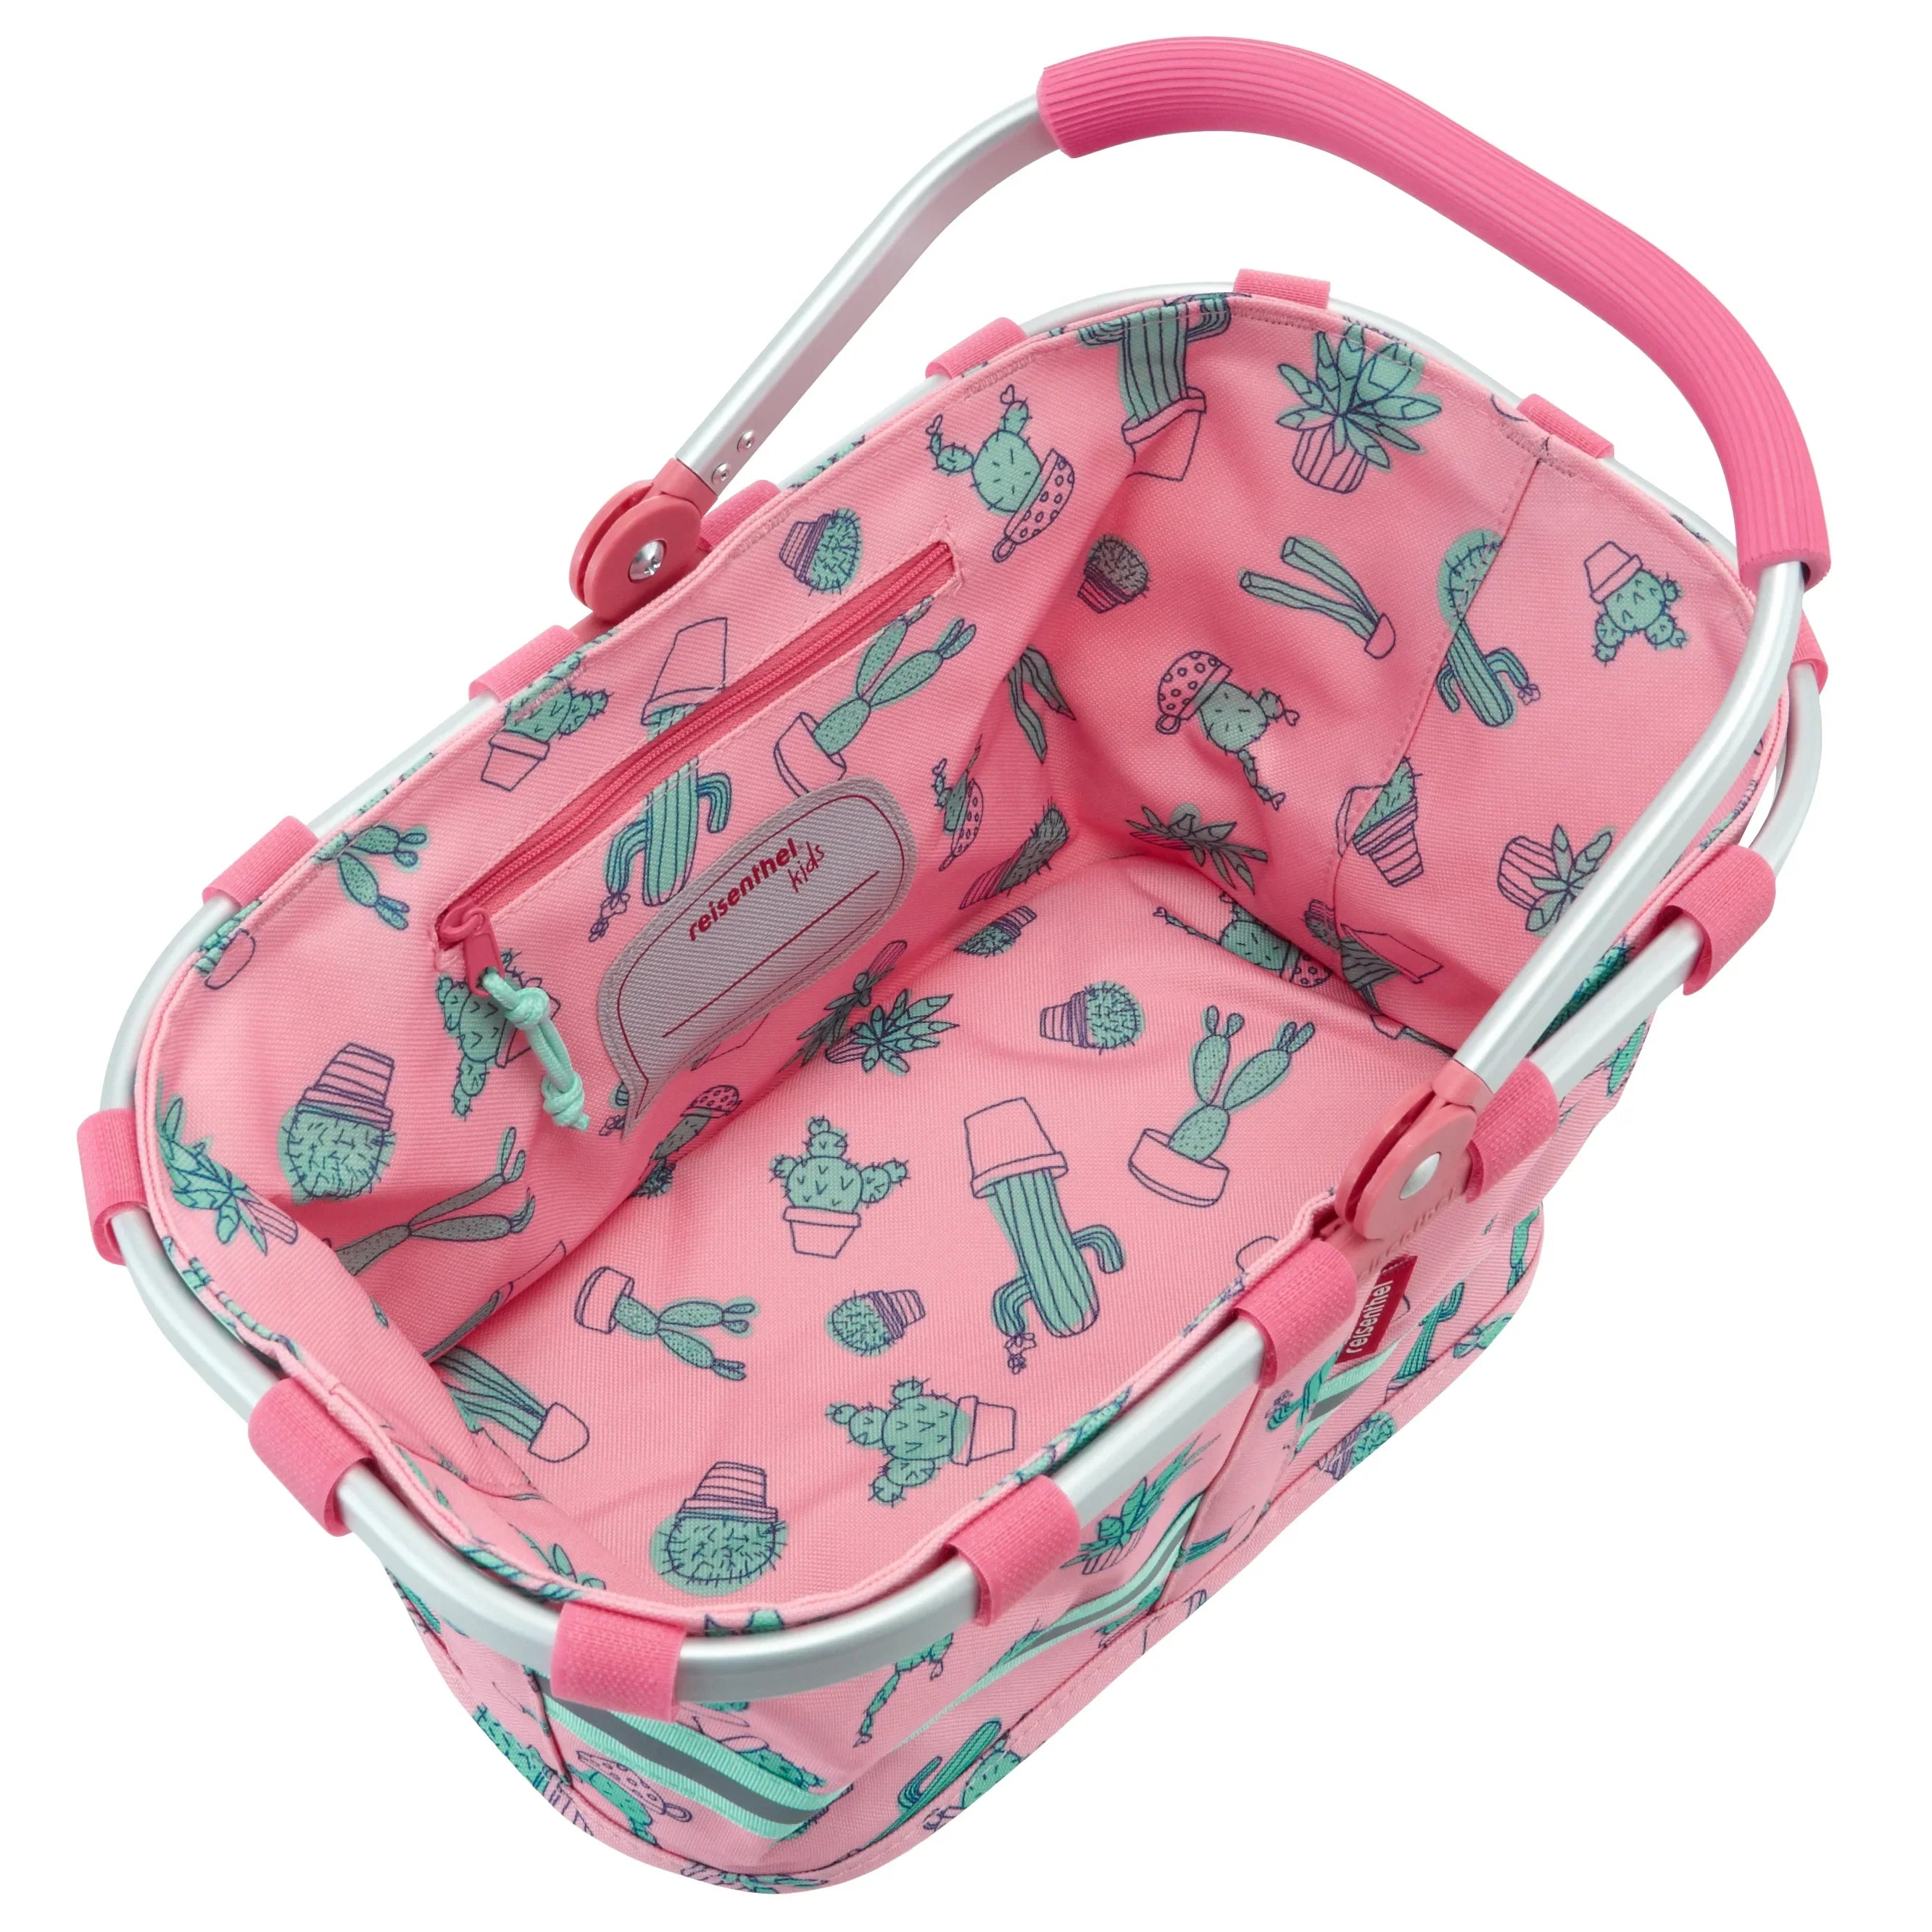 Reisenthel Kids Carrybag XS 33 cm - cats and dogs mint